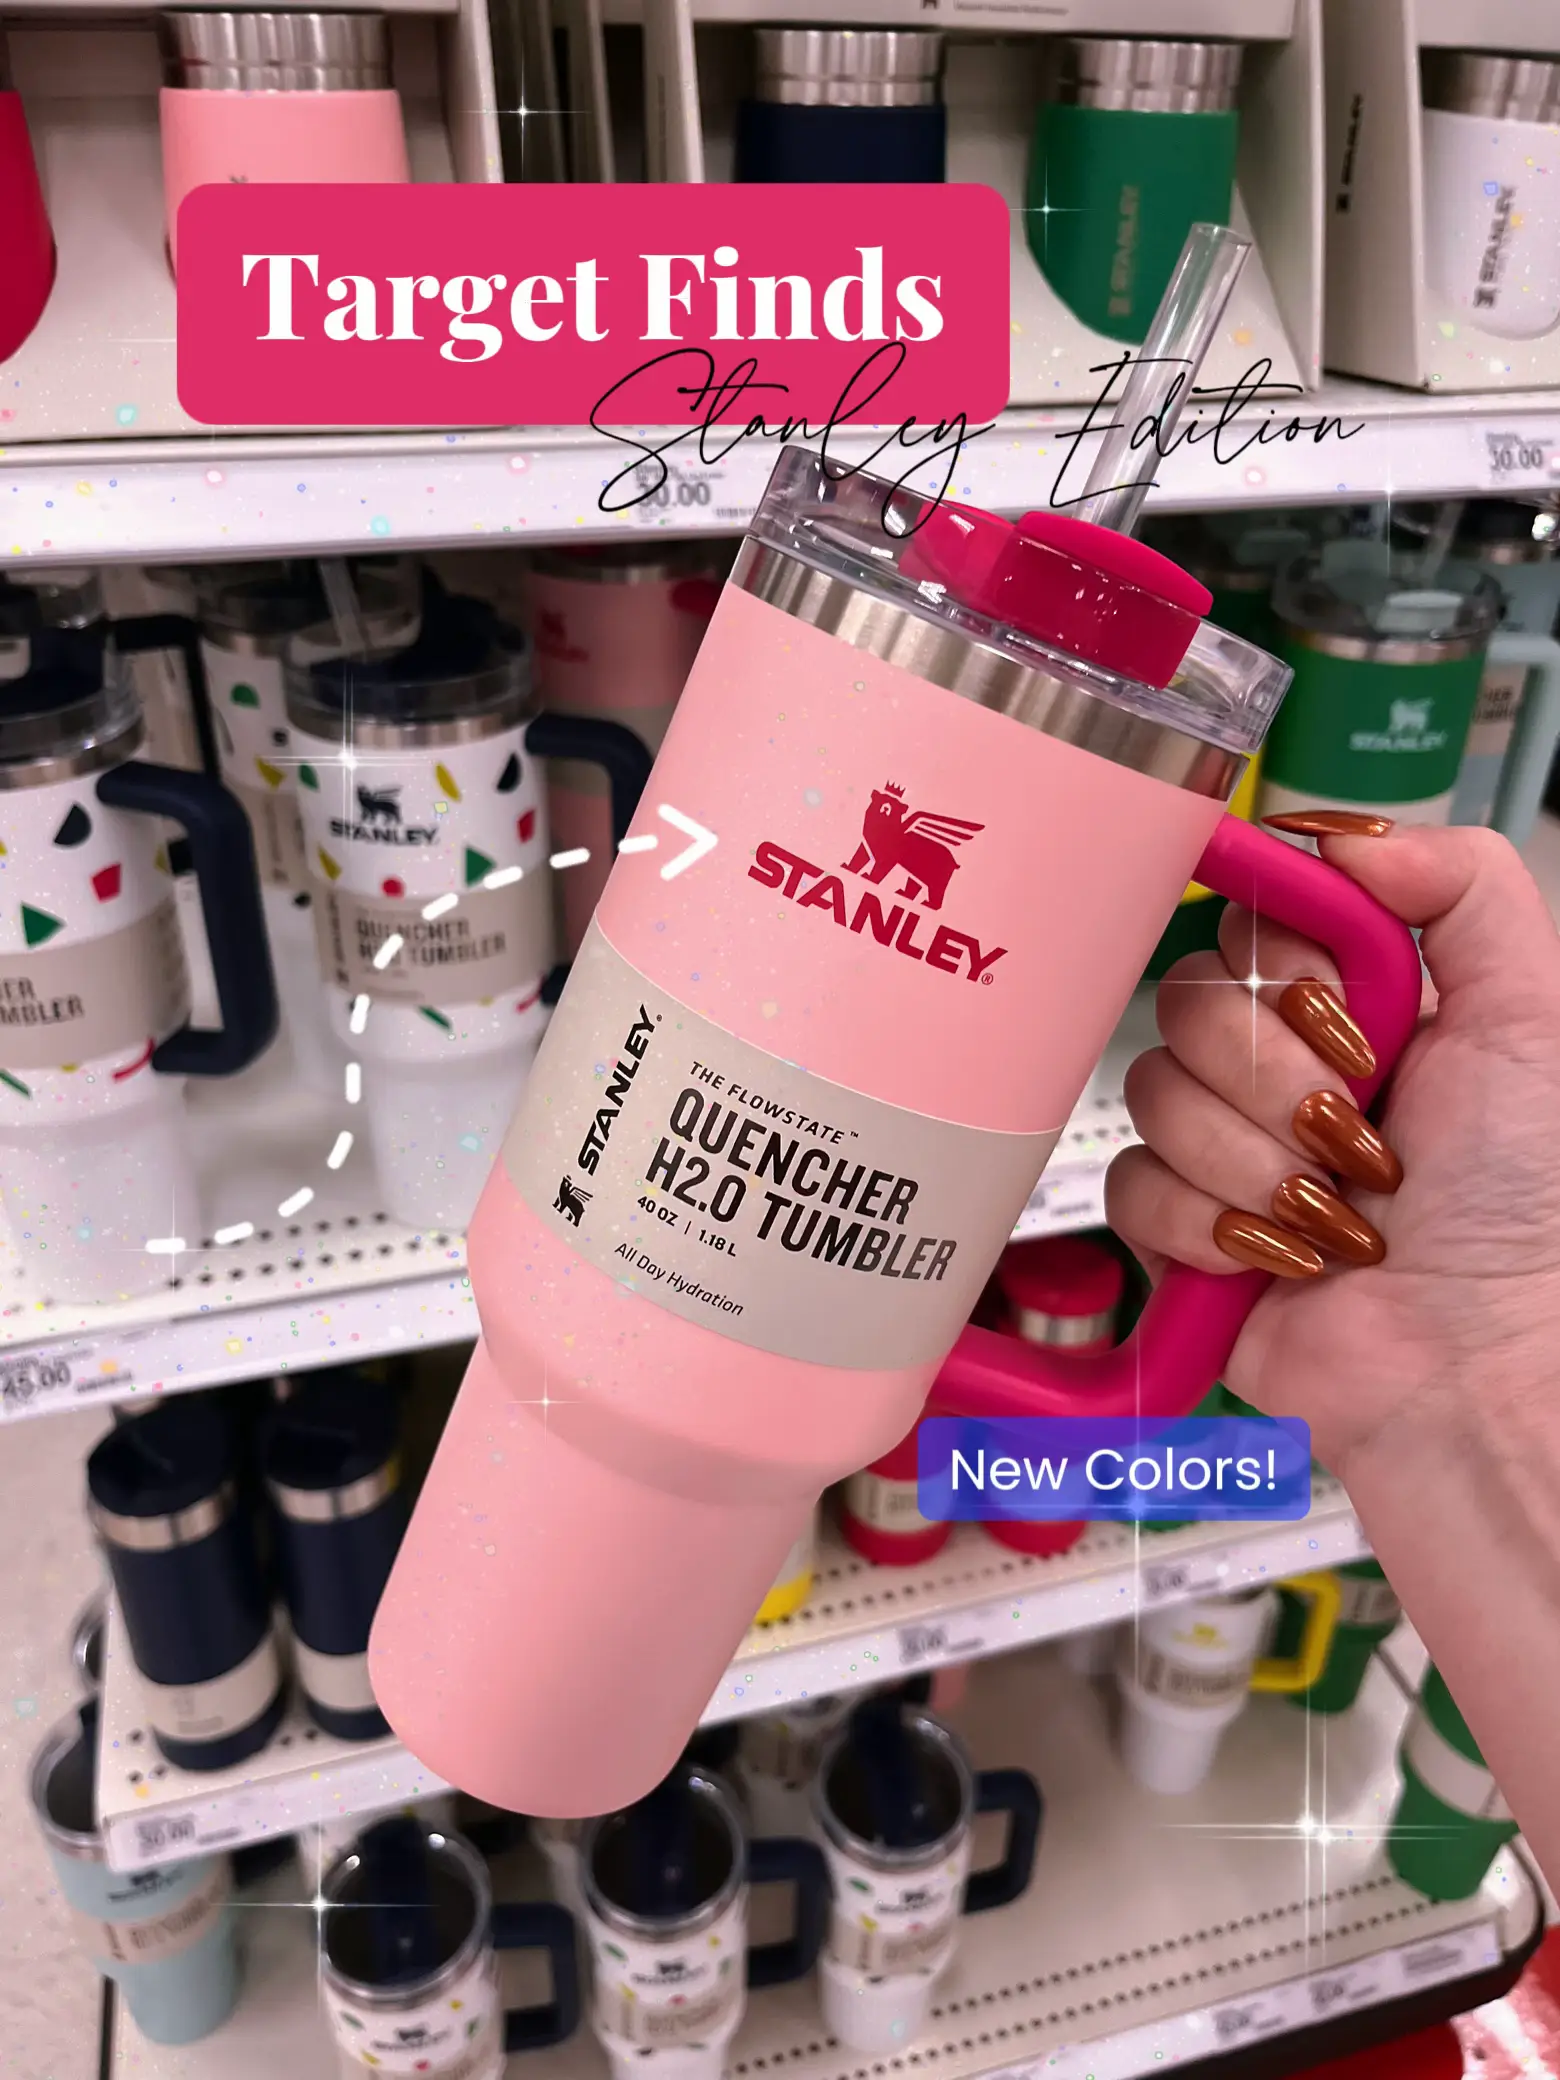 Stanley Just Launched its Viral Tumbler in New Colors, Only at Target